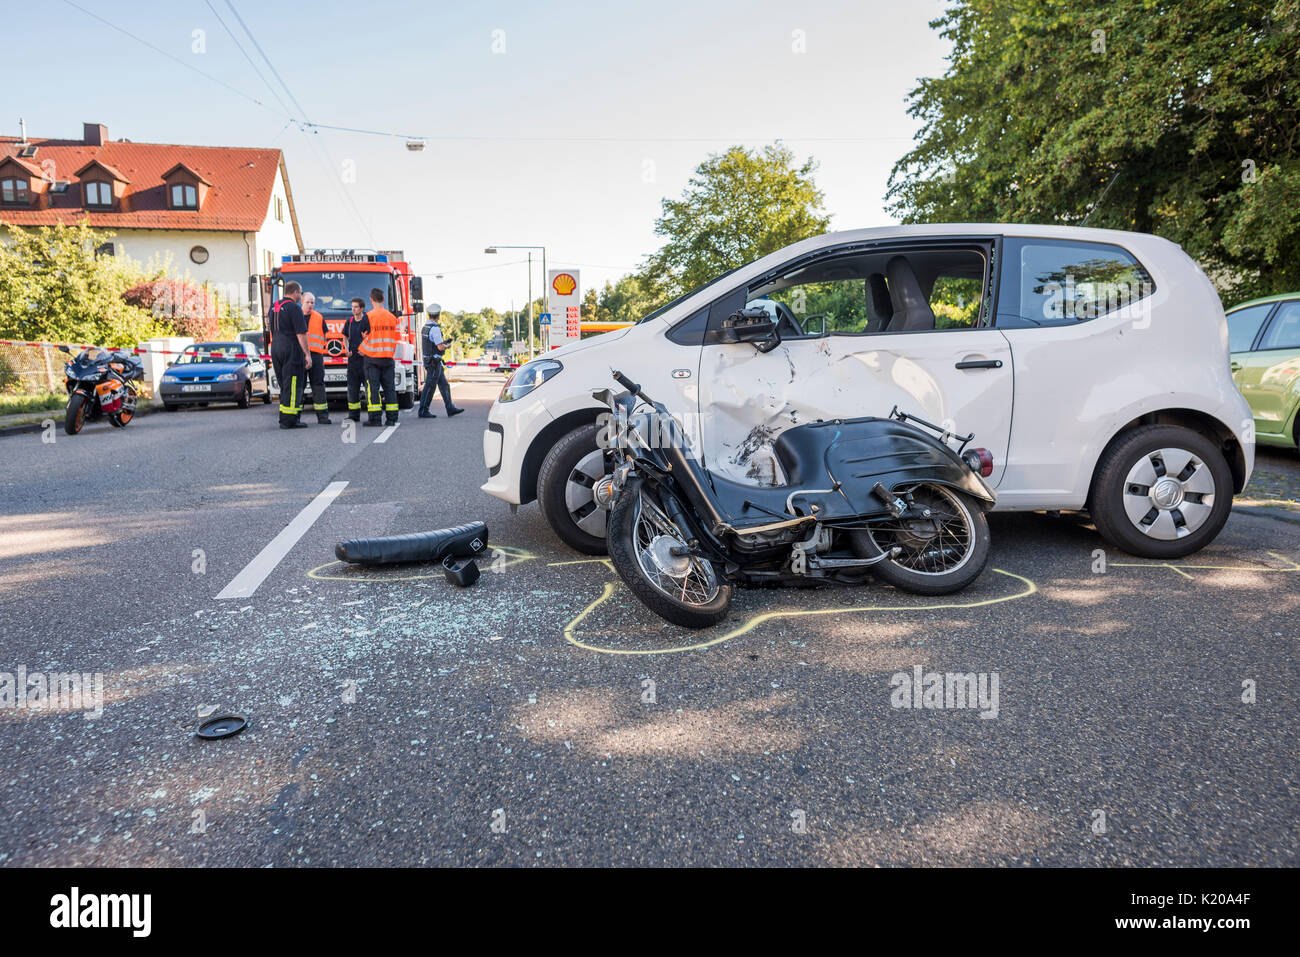 Heavy road accident, Simson scooter crashing in car, police recording accident, Germany Stock Photo